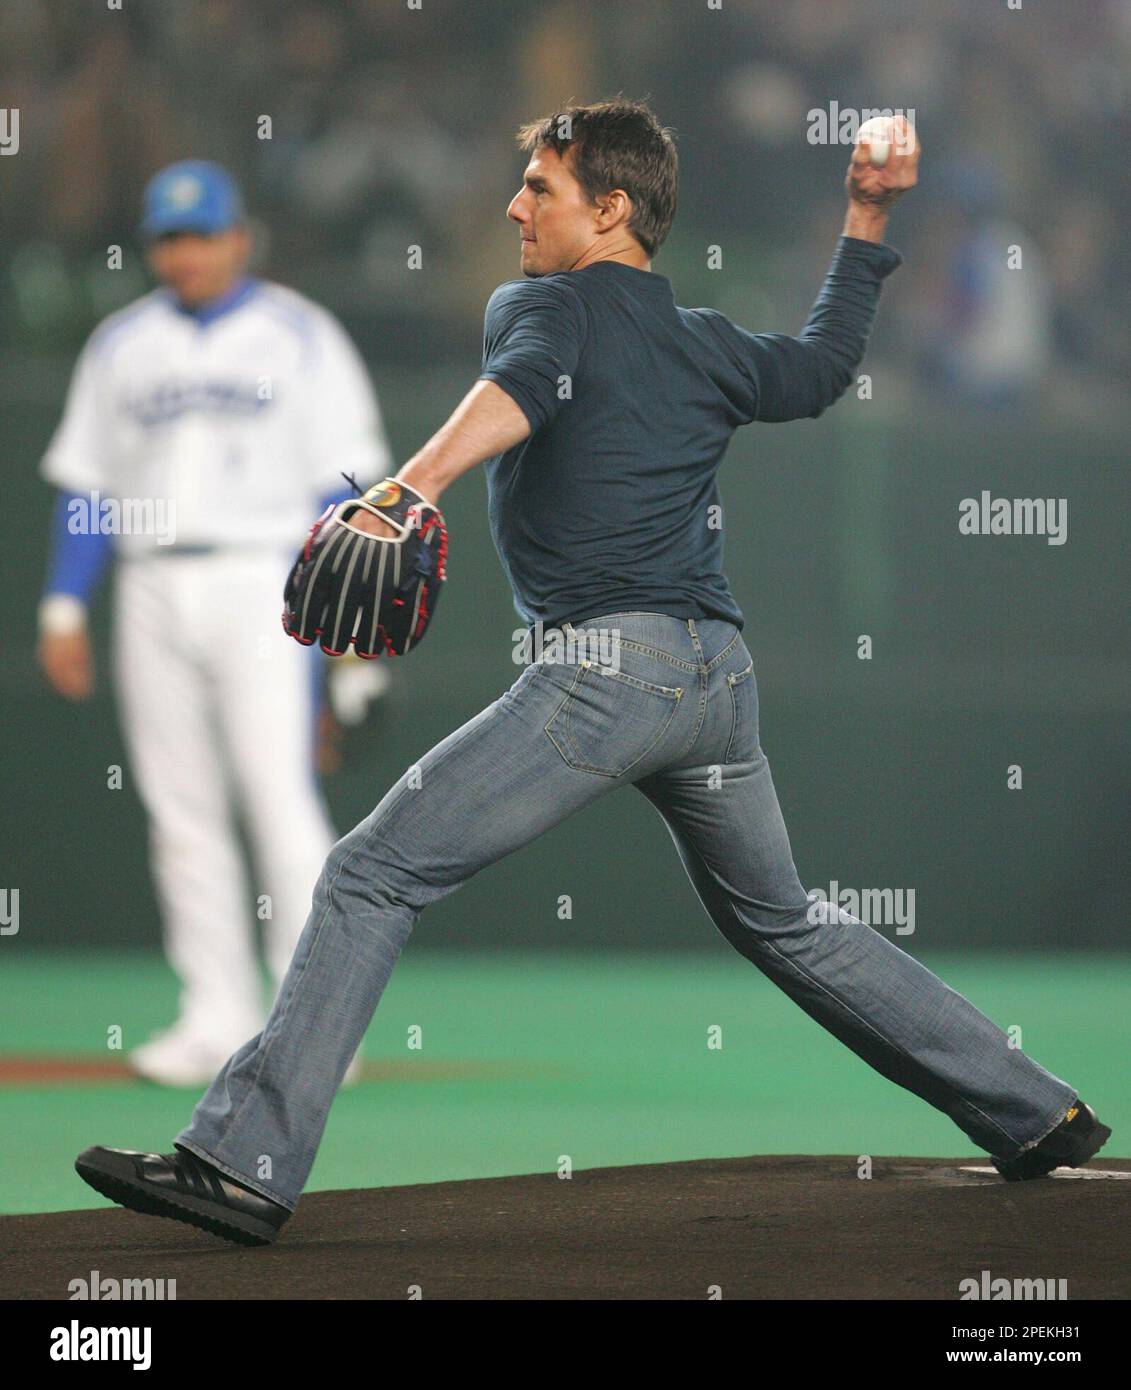 Tom Cruise throws the ceremonial first pitch for the Game 3 of the best-of-seven Japan Series between the Pacific League champion Seibu Lions and its Central League counterpart Chunichi Dragons at Seibu